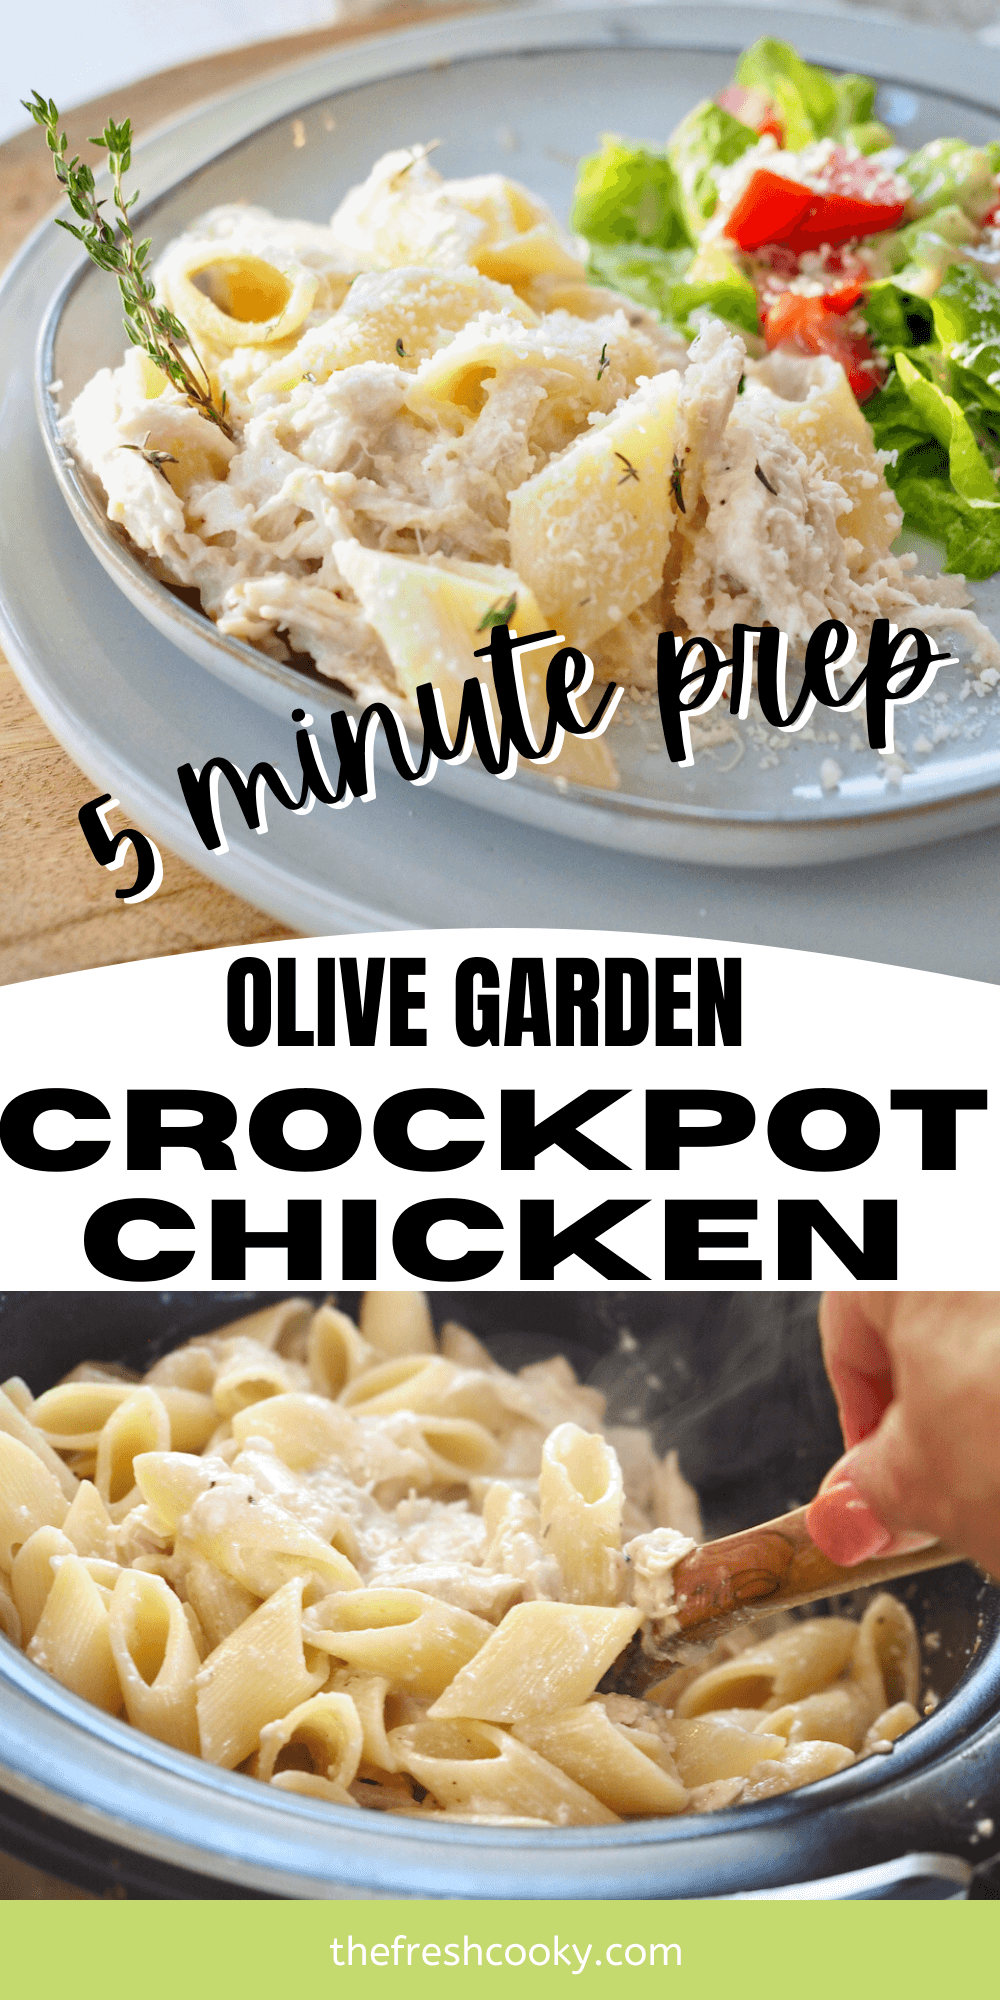 Pin for Olive Garden Crockpot Chicken, with top image of serving of creamy chicken pasta and bottom image of crockpot chicken with hand stirring the pasta in.